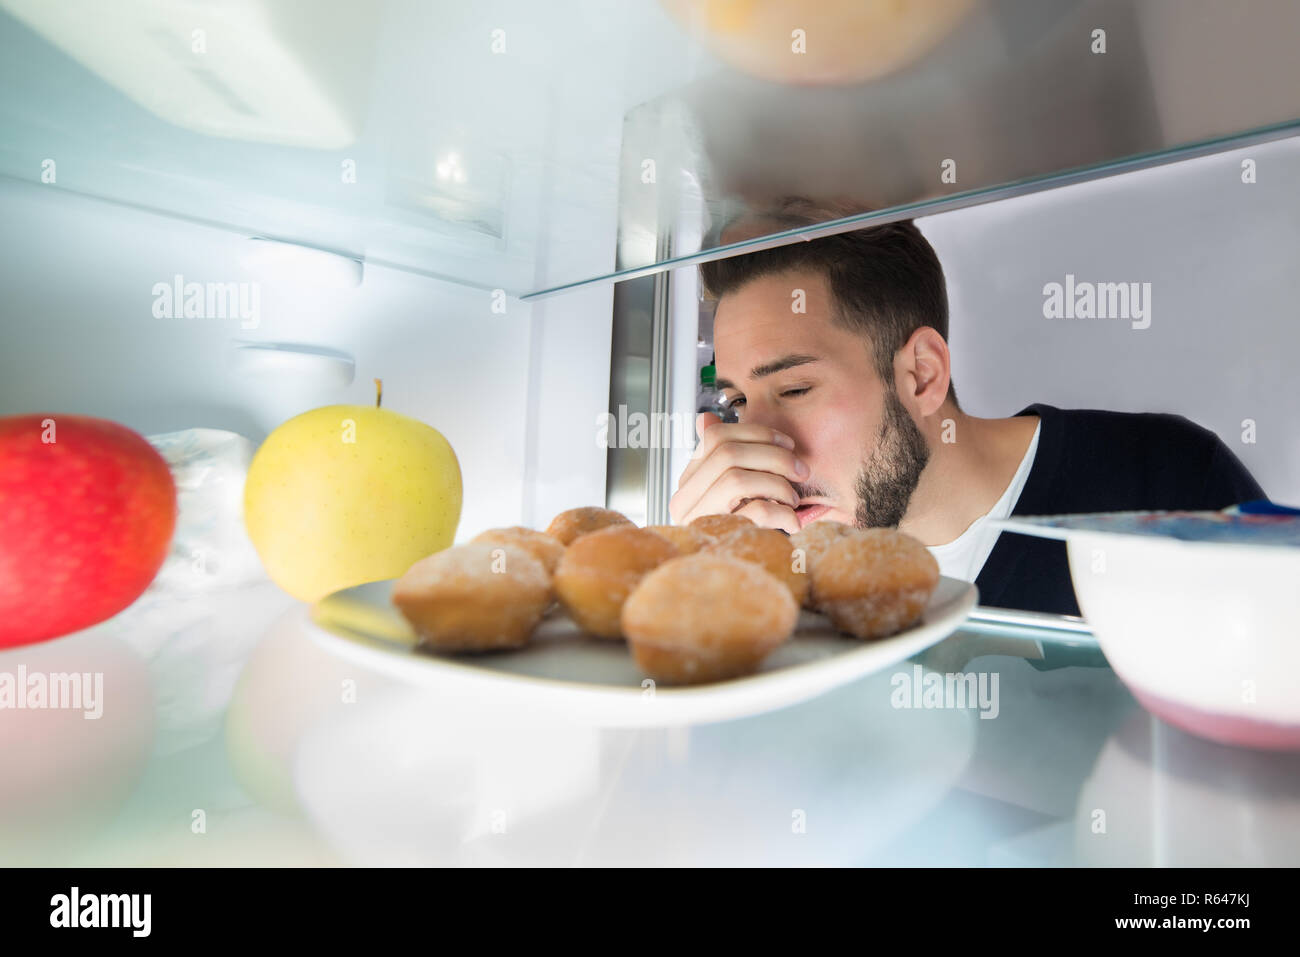 Man Holding His Nose Near Foul Food In Refrigerator Stock Photo